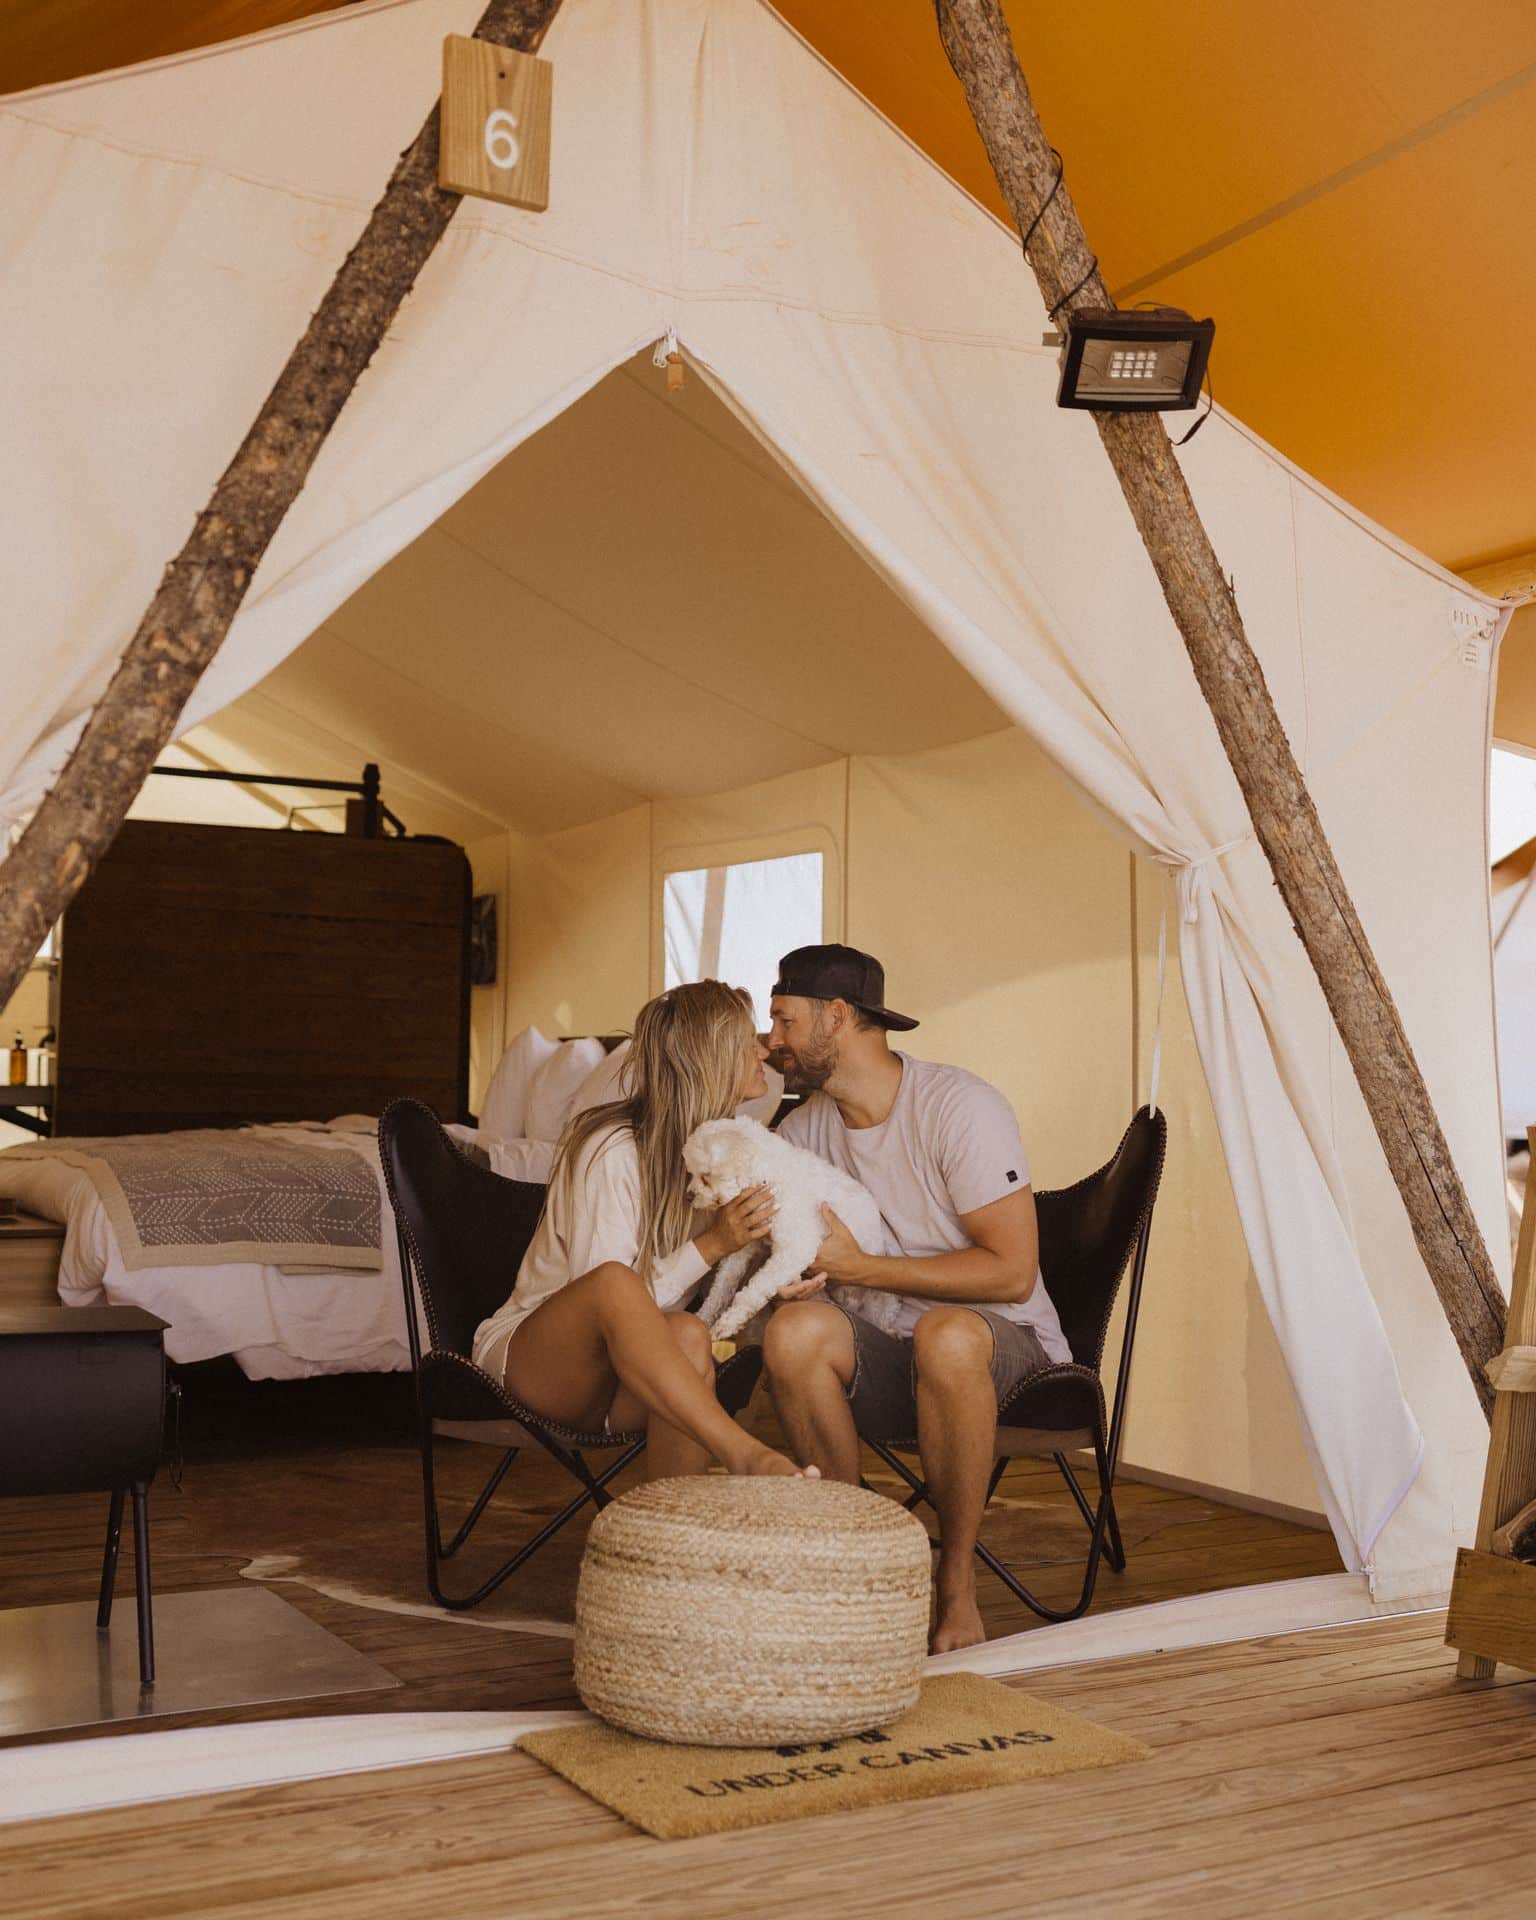 Dan and Chelle in Deluxe tent at Under Canvas Lake Powell-Grand Staircase